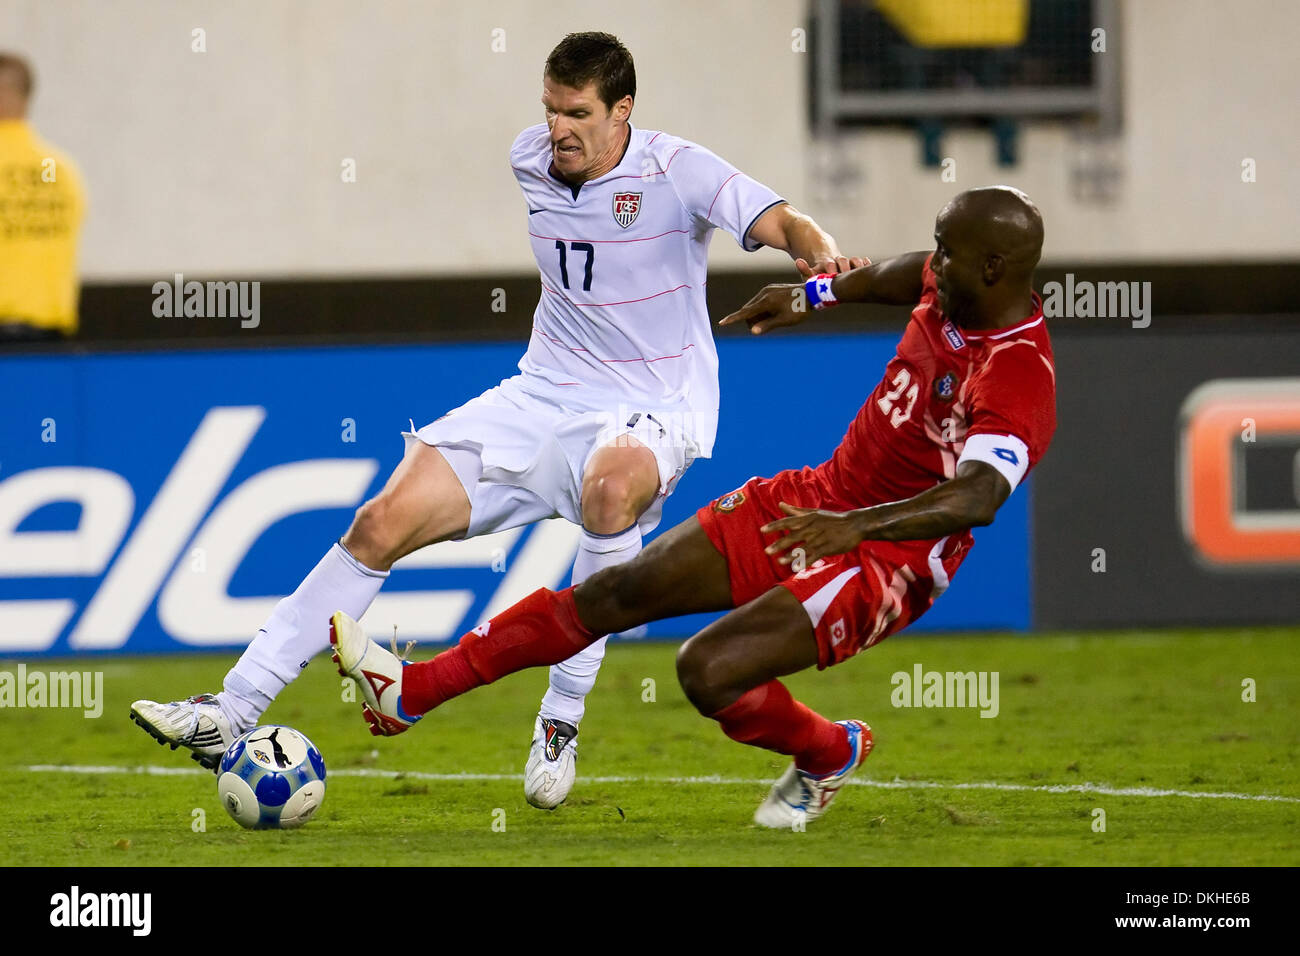 United States' attacker Kenny Cooper (17) trying to keep the ball from the sliding Panama's defender Felipe Baloy (23) during the CONCACAF Gold Cup quarter finals match between United States and Panama at Lincoln Financial Field in Philadelphia, Pennsylvania.  United States beat Panama, 2-1 in overtime. (Credit Image: © Chris Szagola/Southcreek Global/ZUMApress.com) Stock Photo